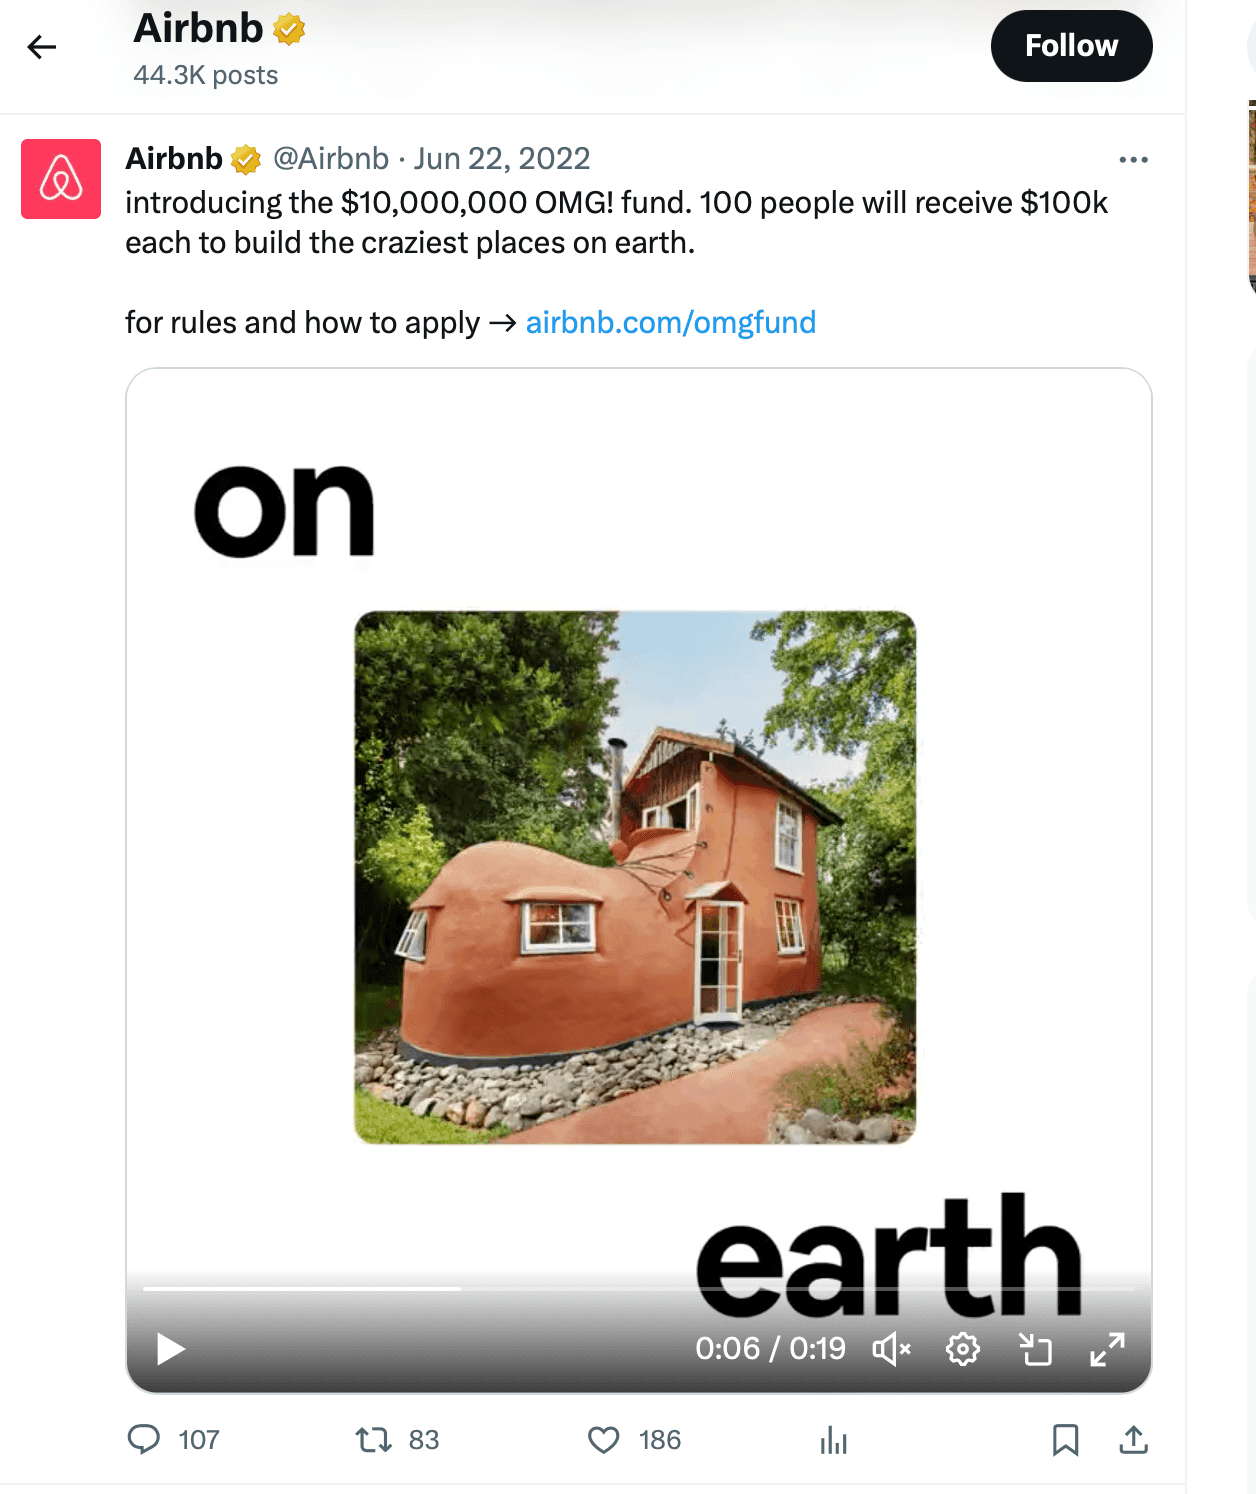 Airbnb Twitter giveaway to build Airbnb